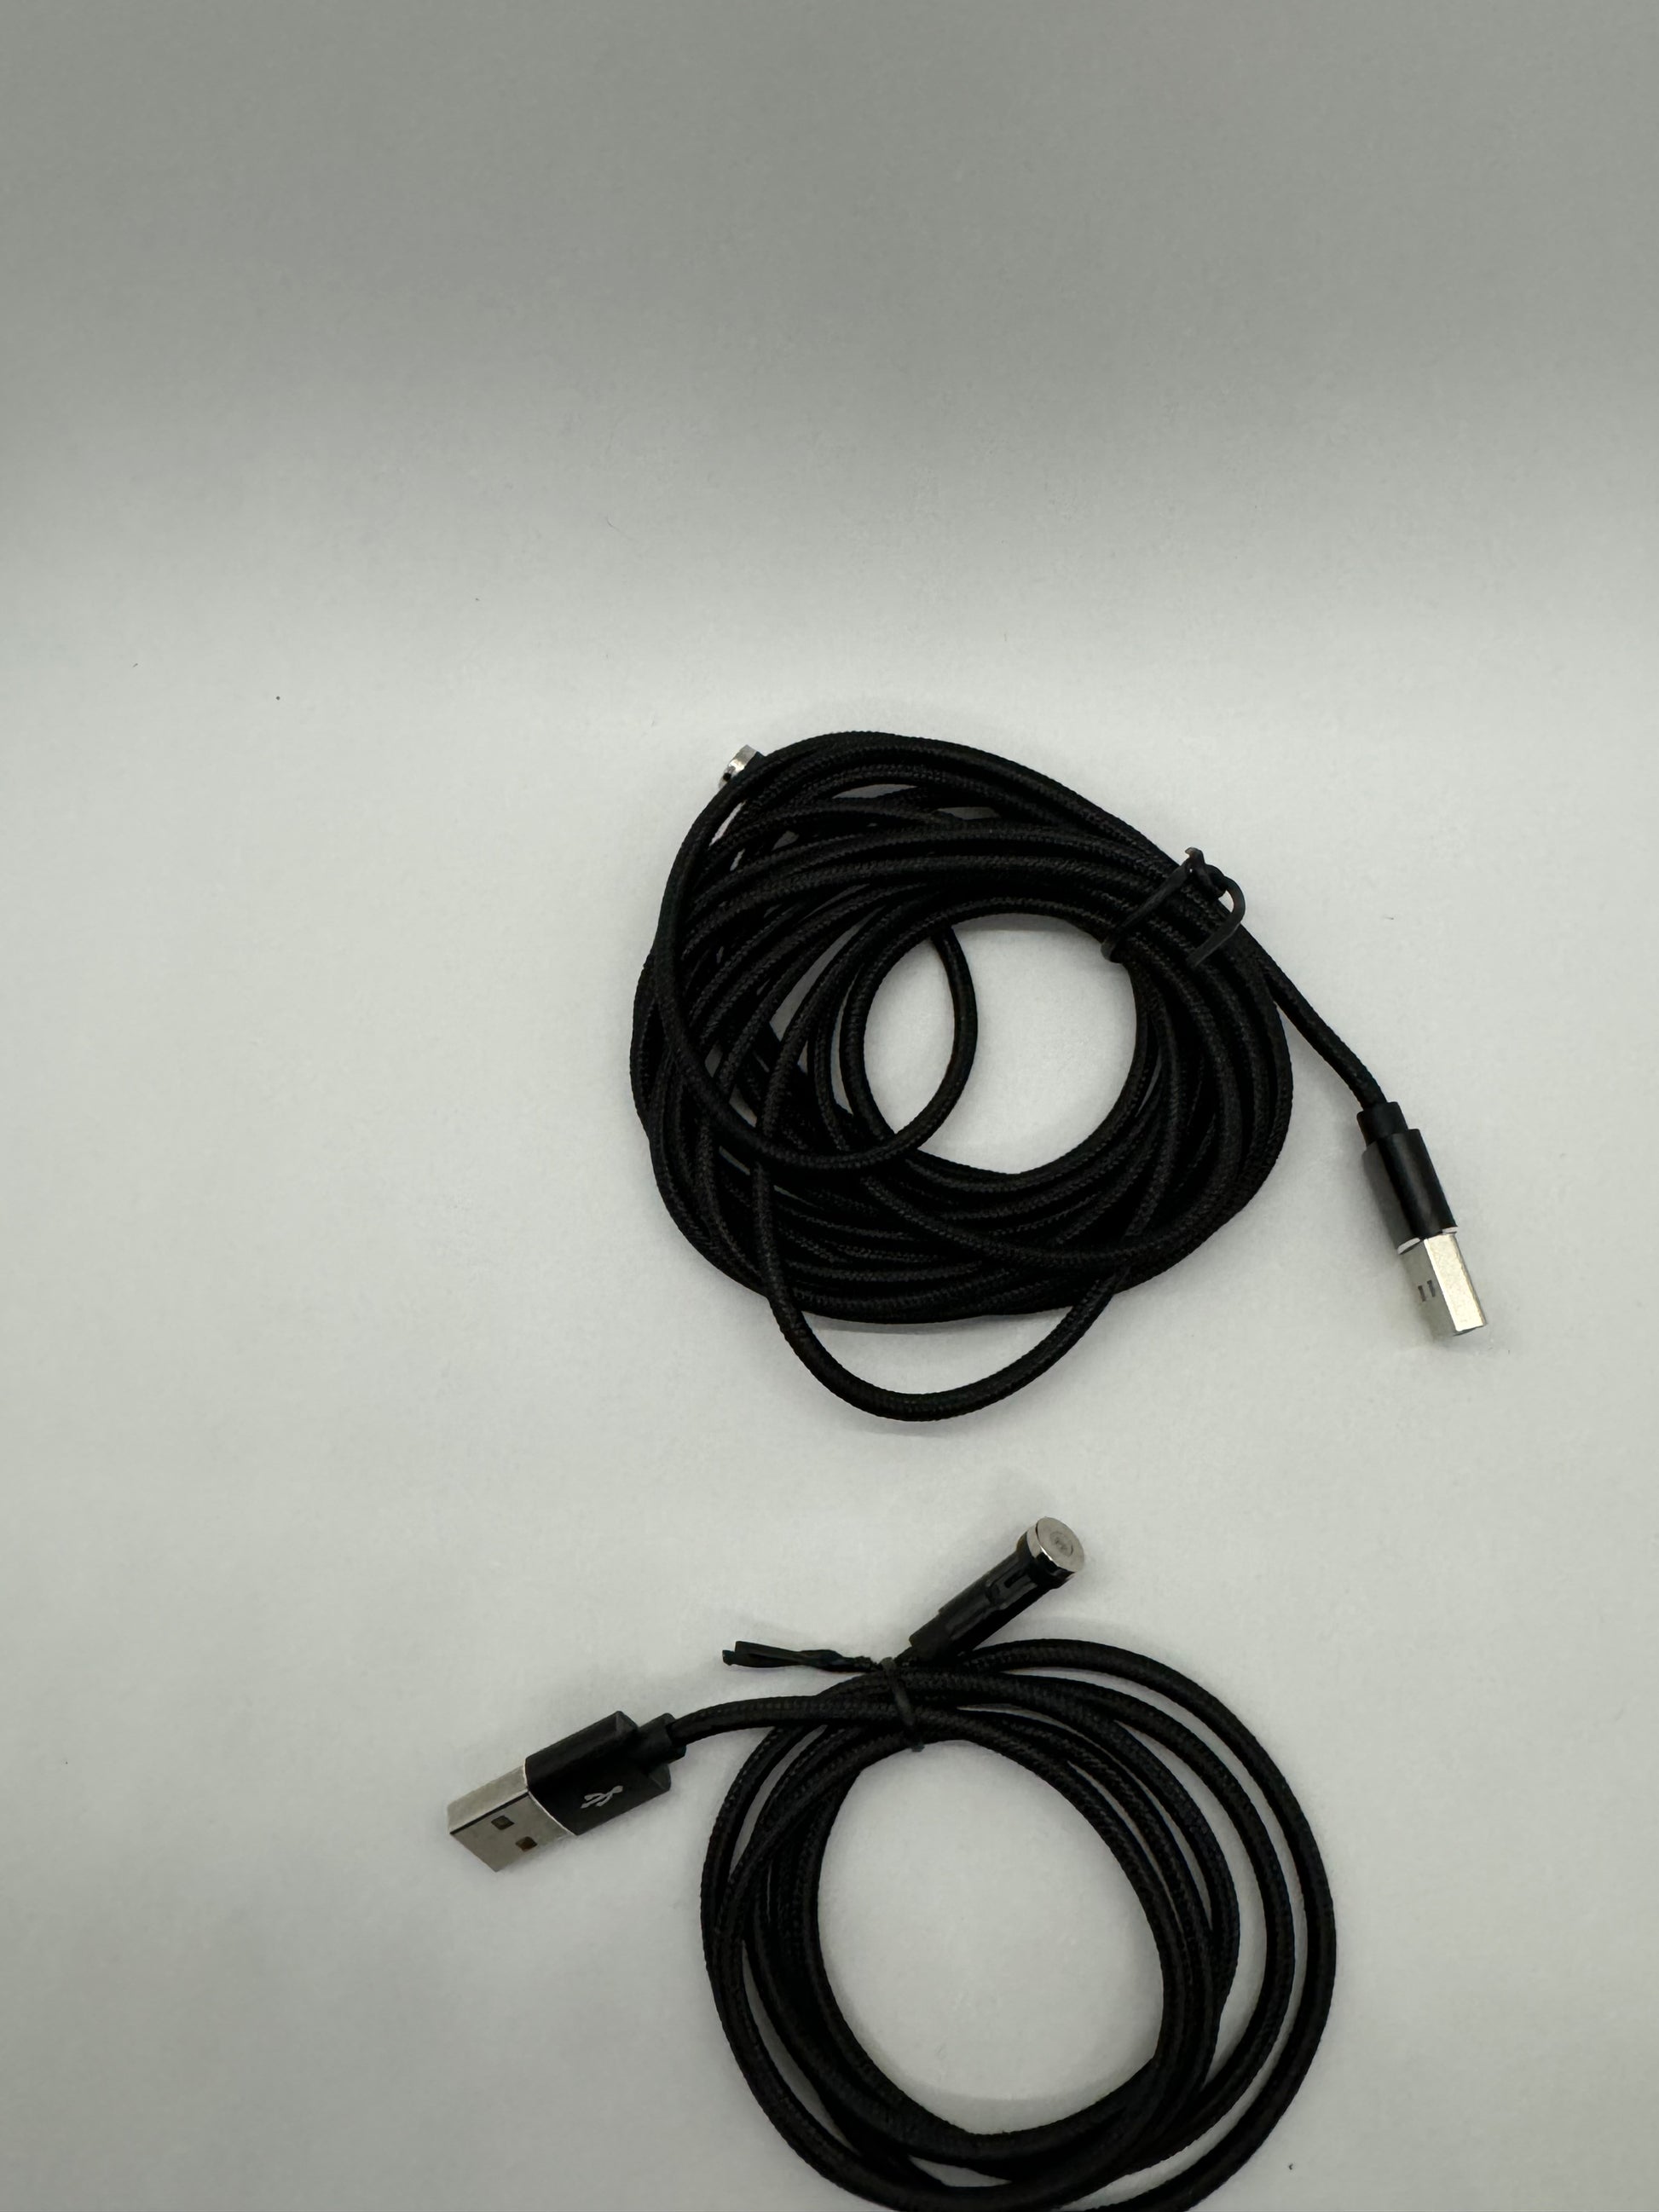 The picture shows two black cables on a white background. Both cables are coiled. One of the cables has a USB connector on one end and a lightning connector on the other end. The other cable has a USB connector on one end and what appears to be a micro USB connector on the other end. The cables appear to be made of a braided material.